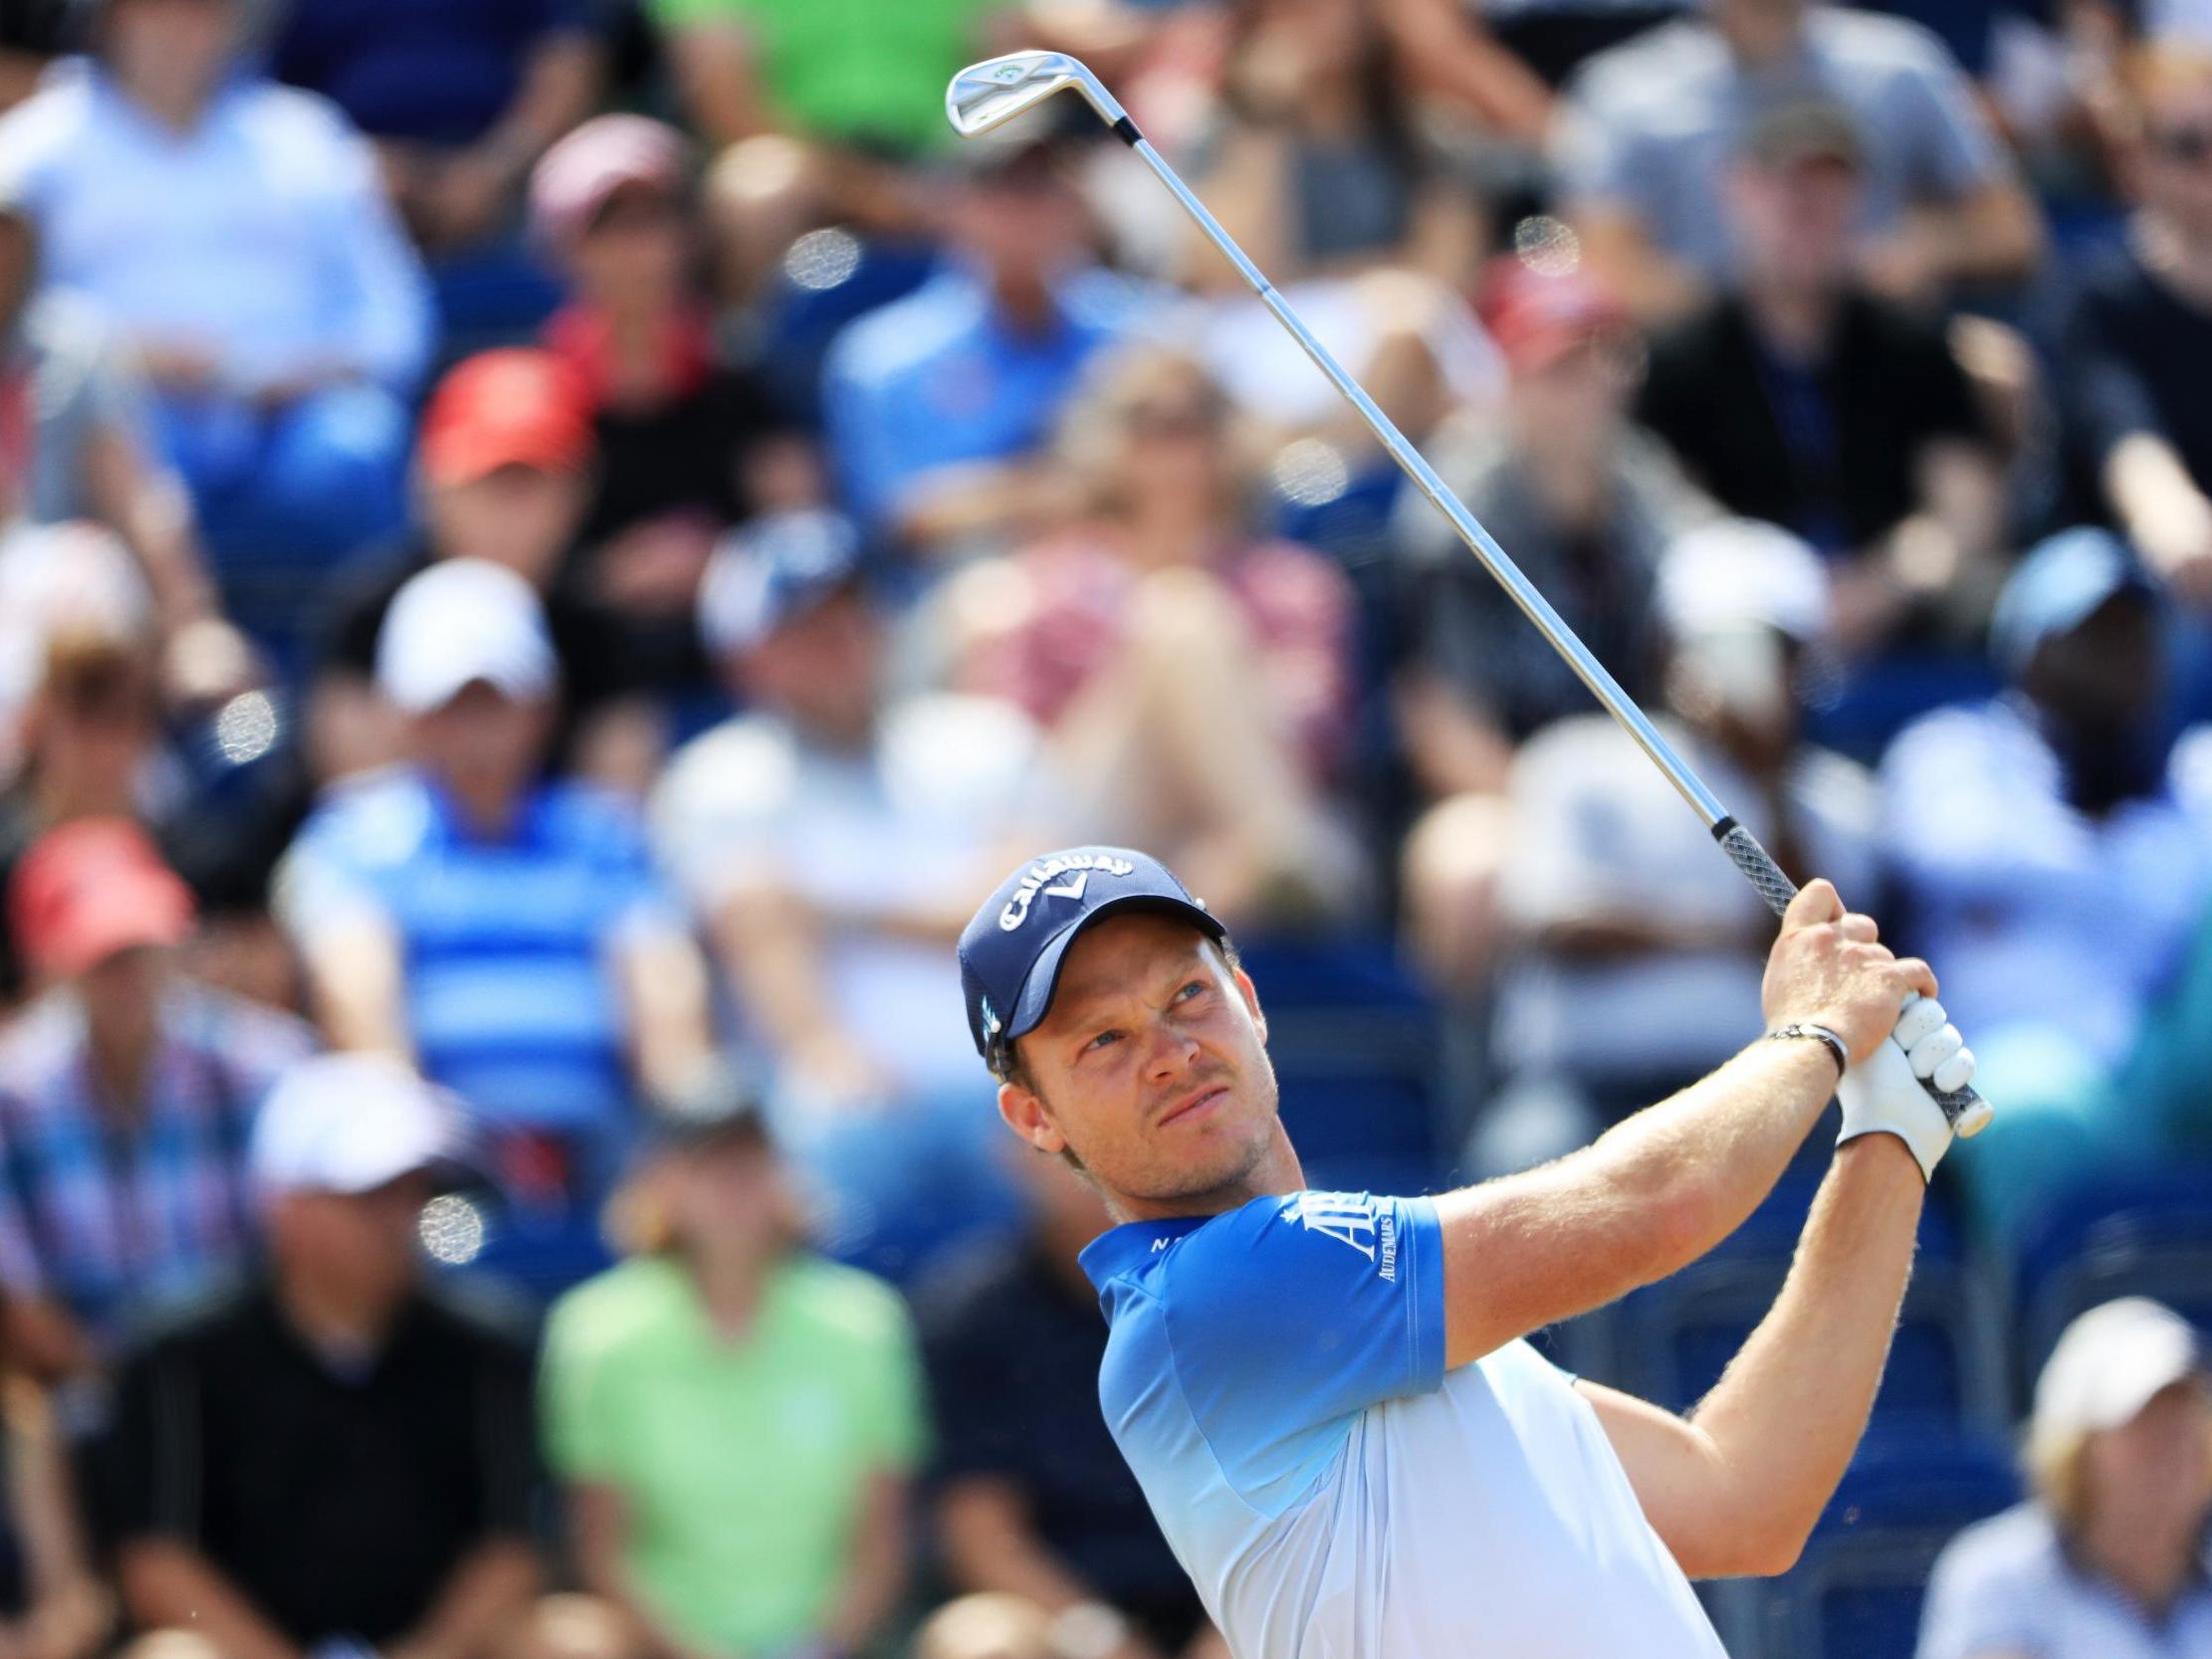 Danny Willett's result at Carnoustie was his best finish in any major since the 2016 Masters